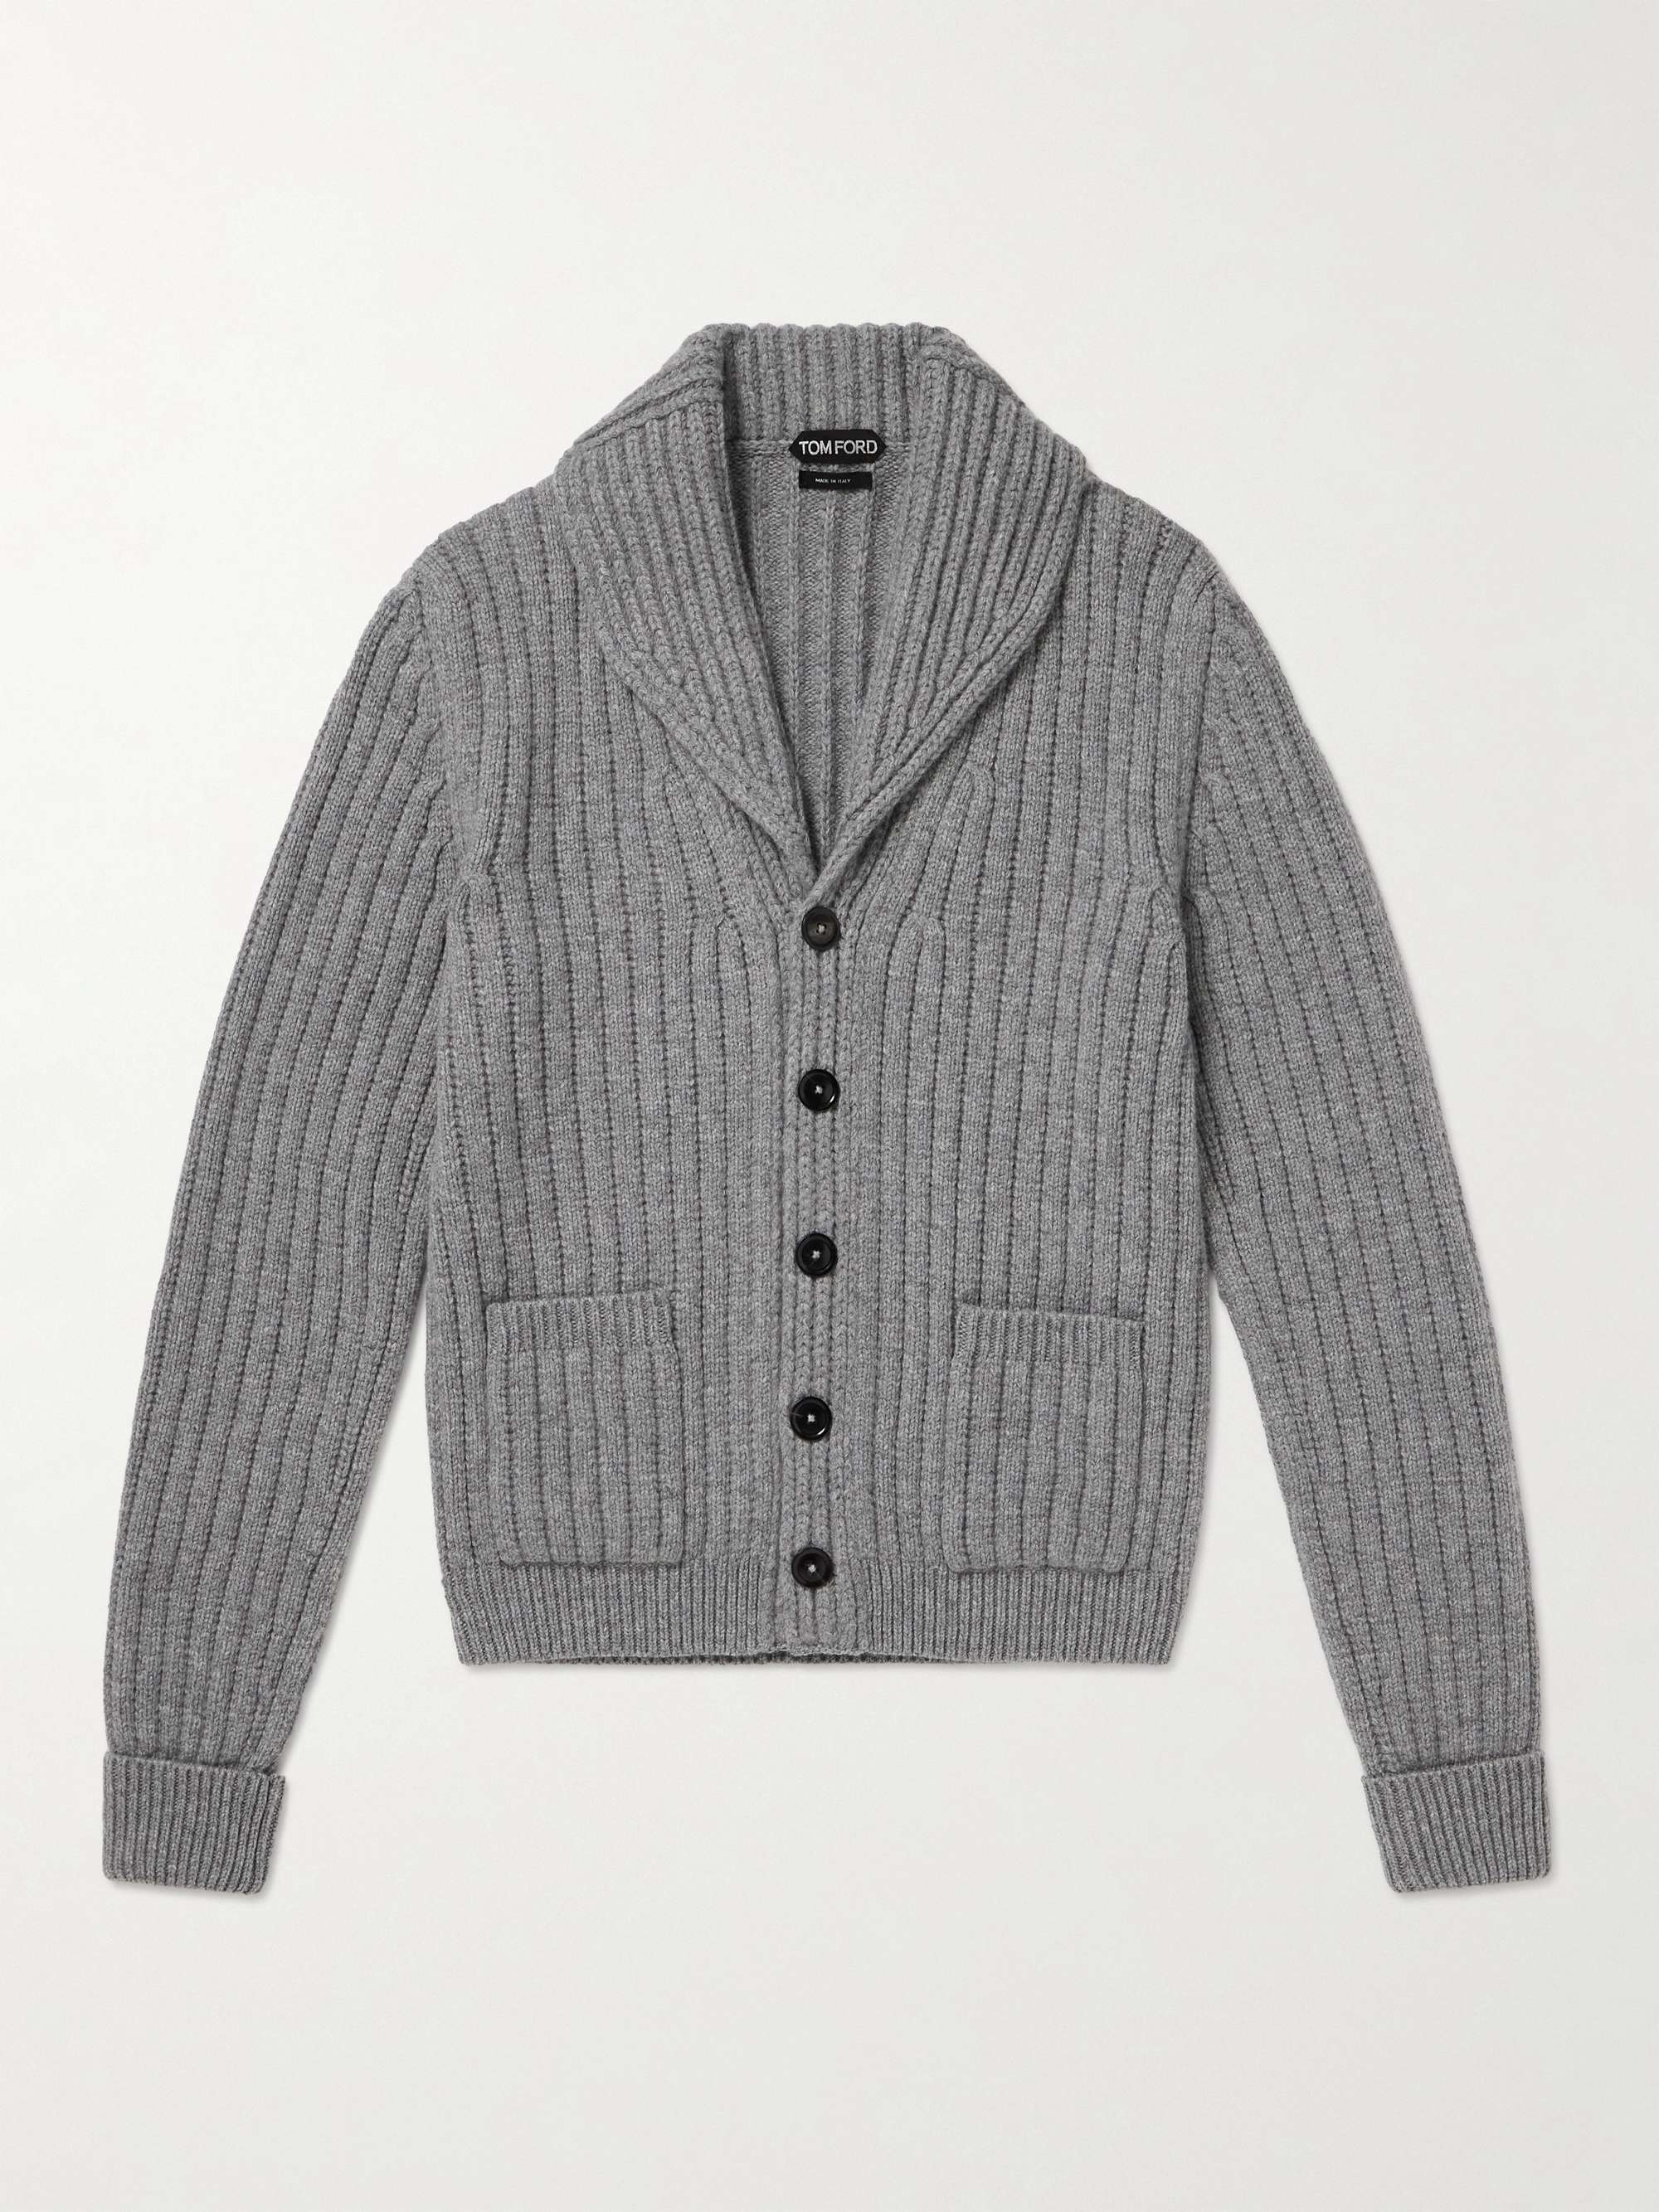 TOM FORD Shawl-Collar Ribbed Wool and Cashmere-Blend Cardigan for Men | MR  PORTER